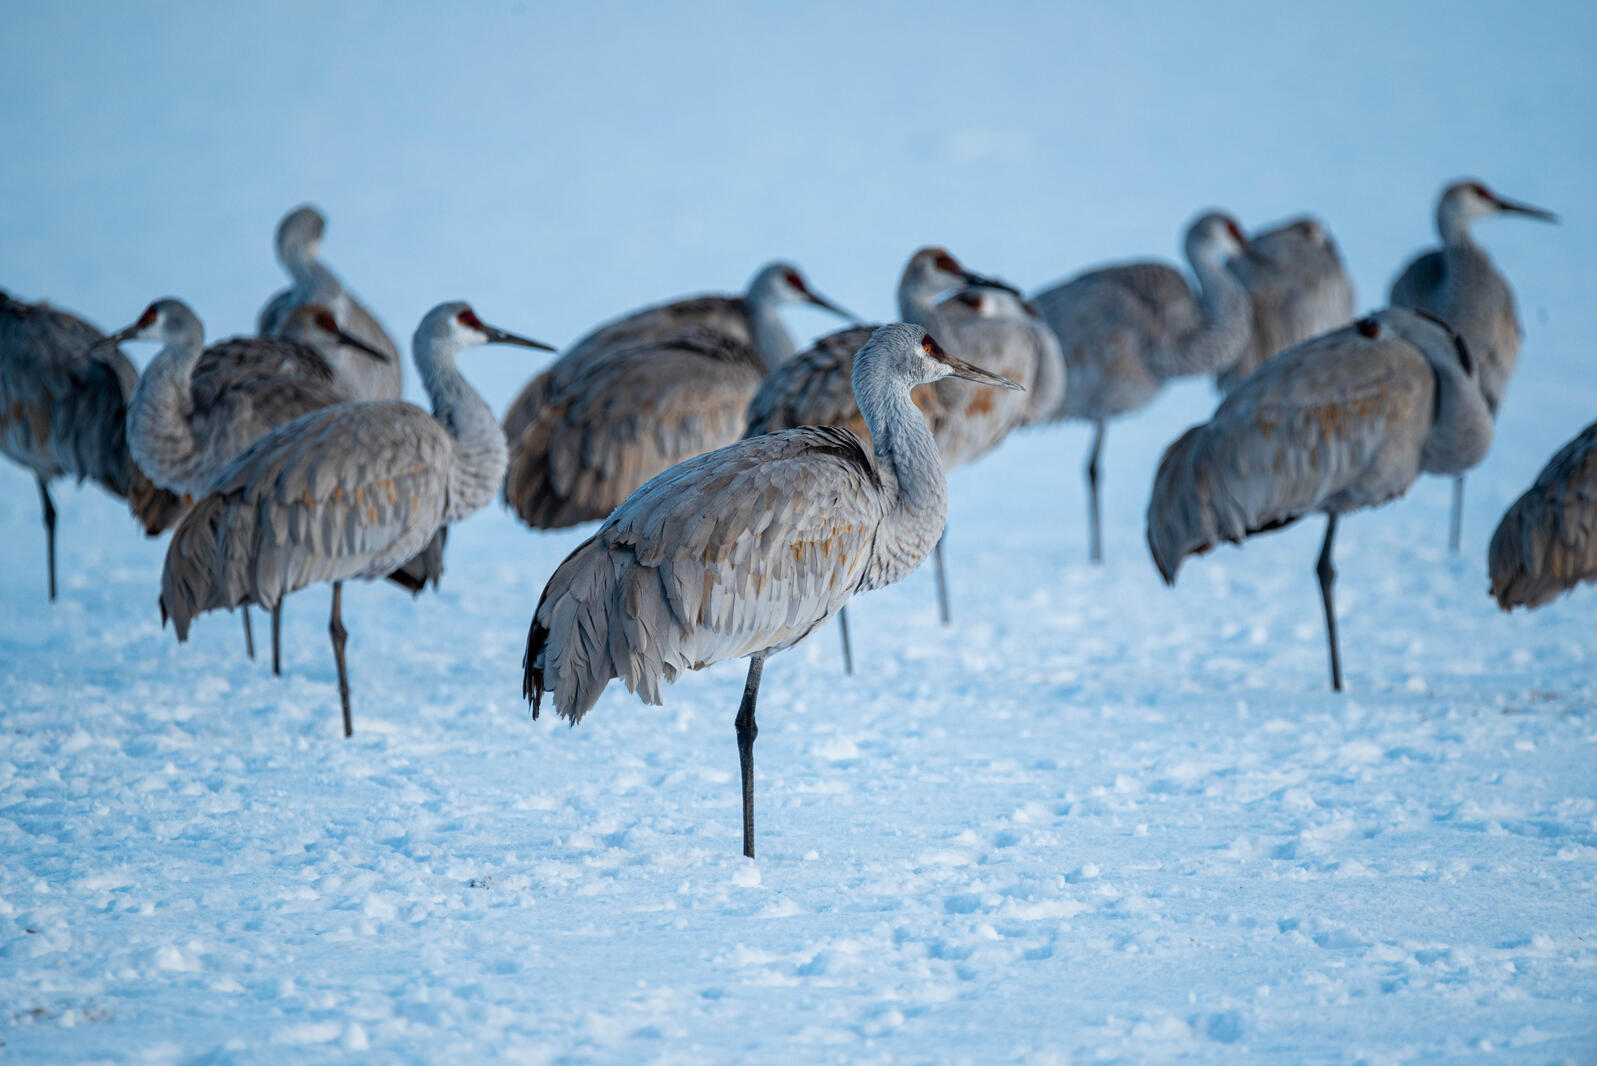 A group of Sandhill Cranes stand together, necks hunched and fluffed up in an attempt to stay warm on a field of snow.